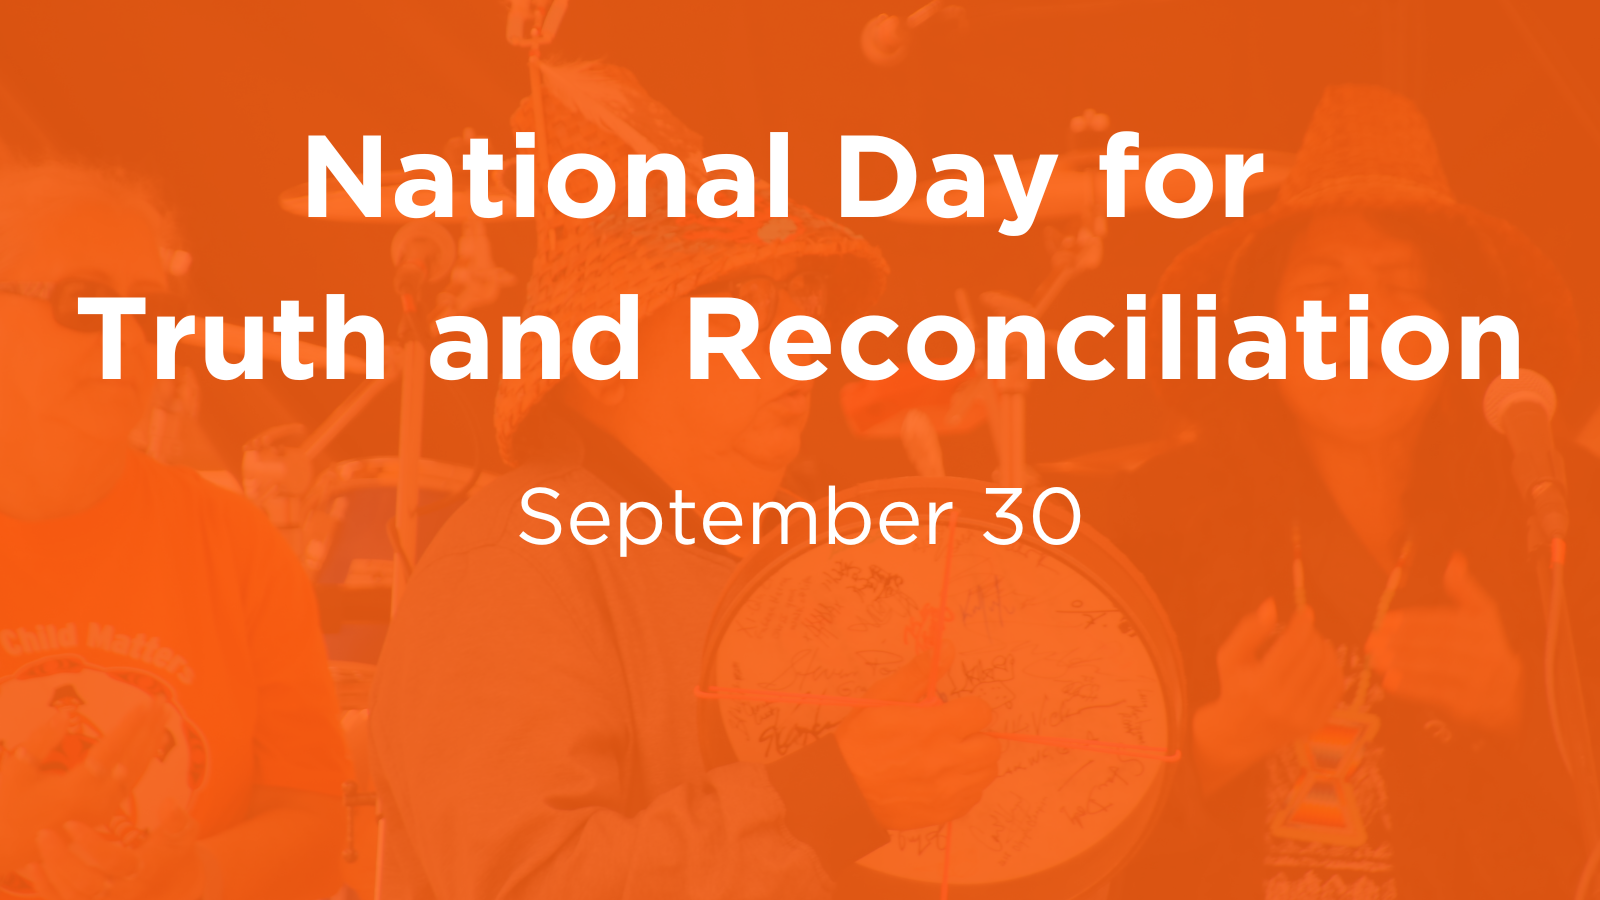 National Day for Truth and Reconciliation September 30. Indigenous drummer in background